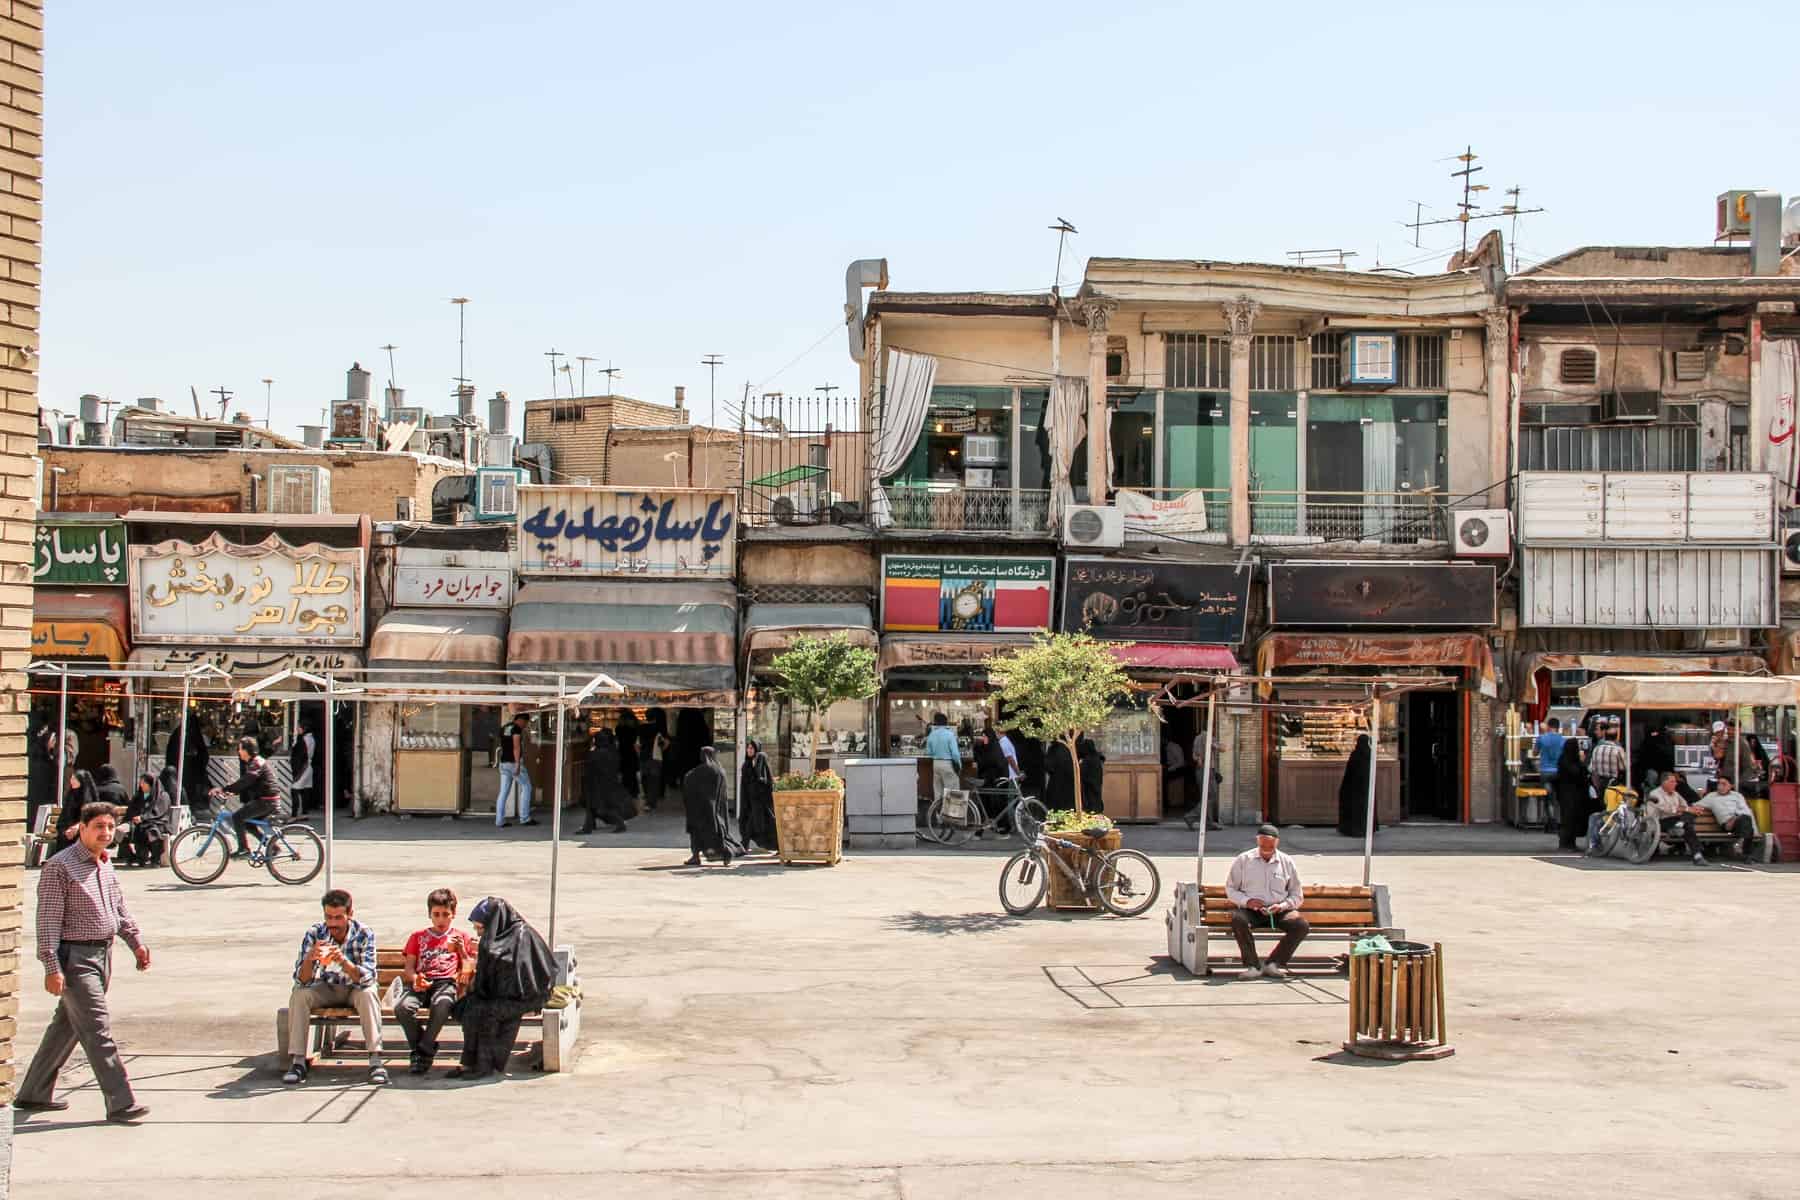 People sitting on benches on a beautiful street in Iran full of narrow, rectangular buildings and shop fronts. 